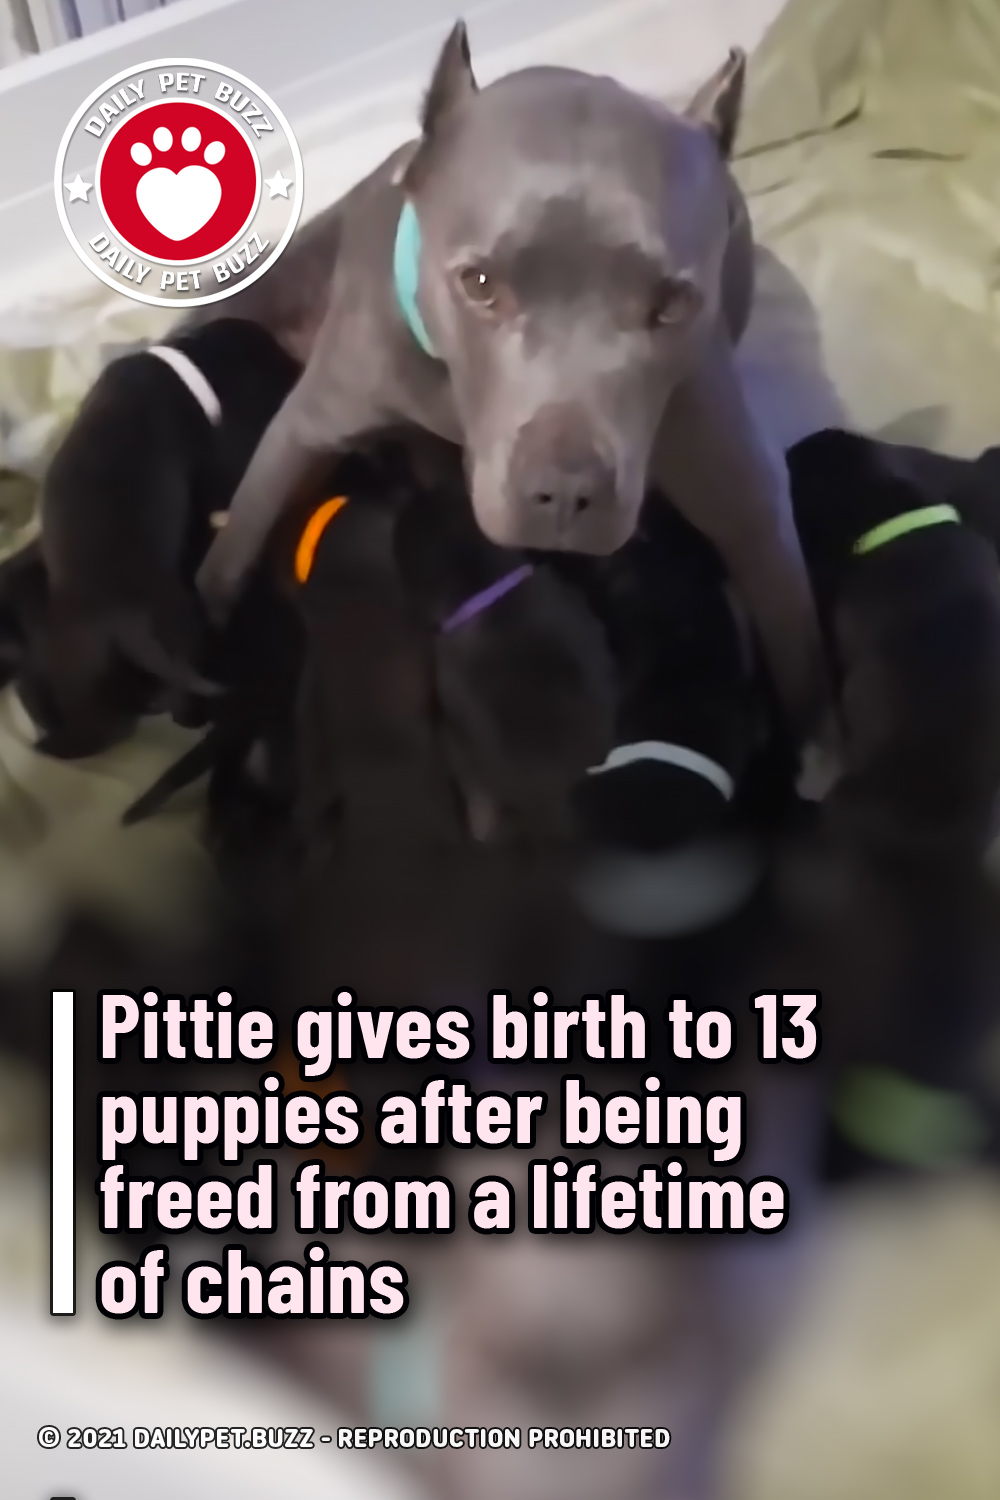 Pittie gives birth to 13 puppies after being freed from a lifetime of chains